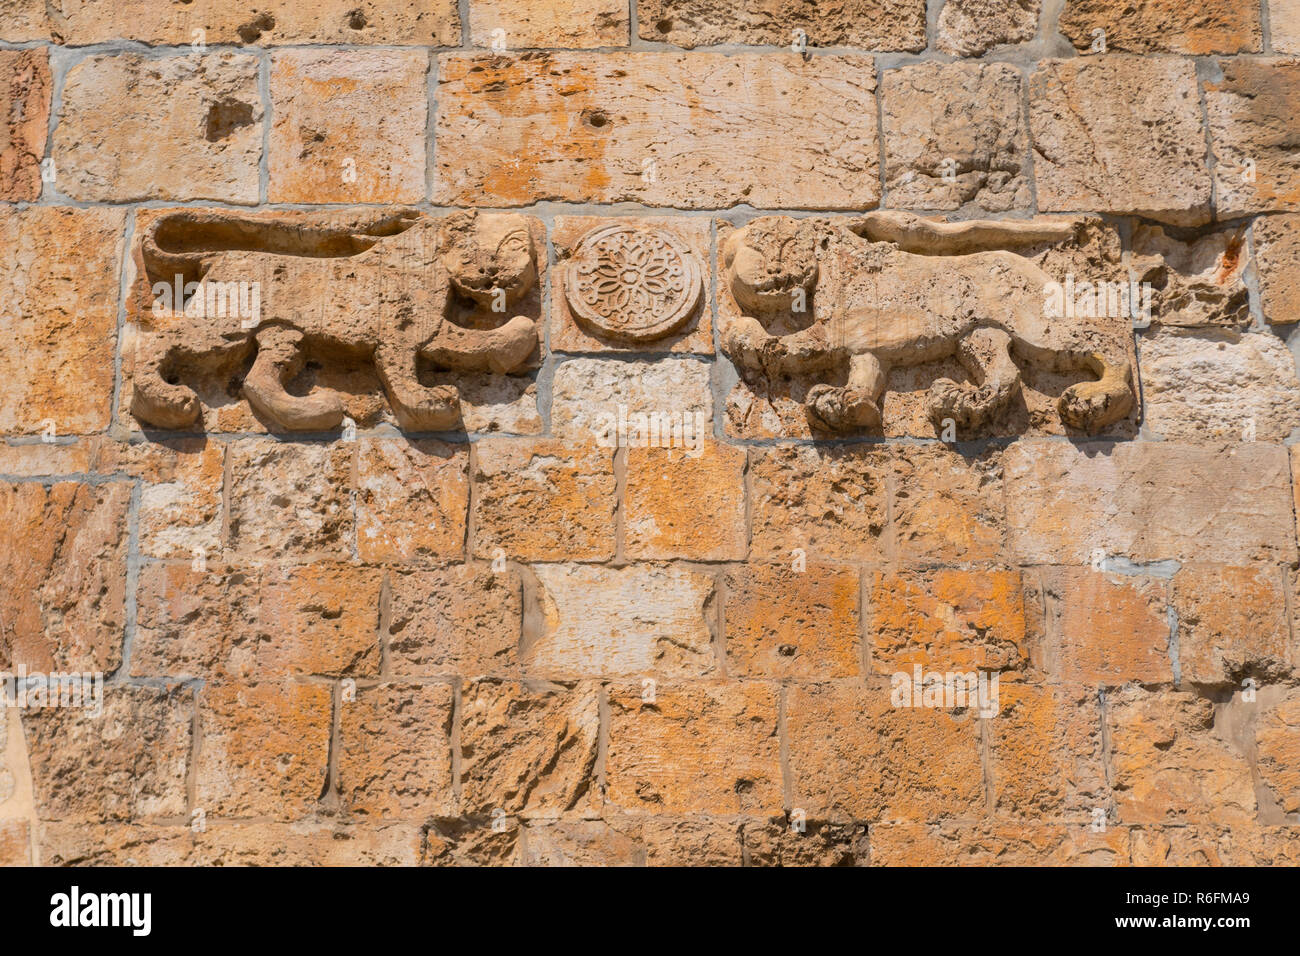 Relief On The Lions Gate, Entrance To The Muslim Quarter Of The Old City In Jerusalem, Israel Stock Photo